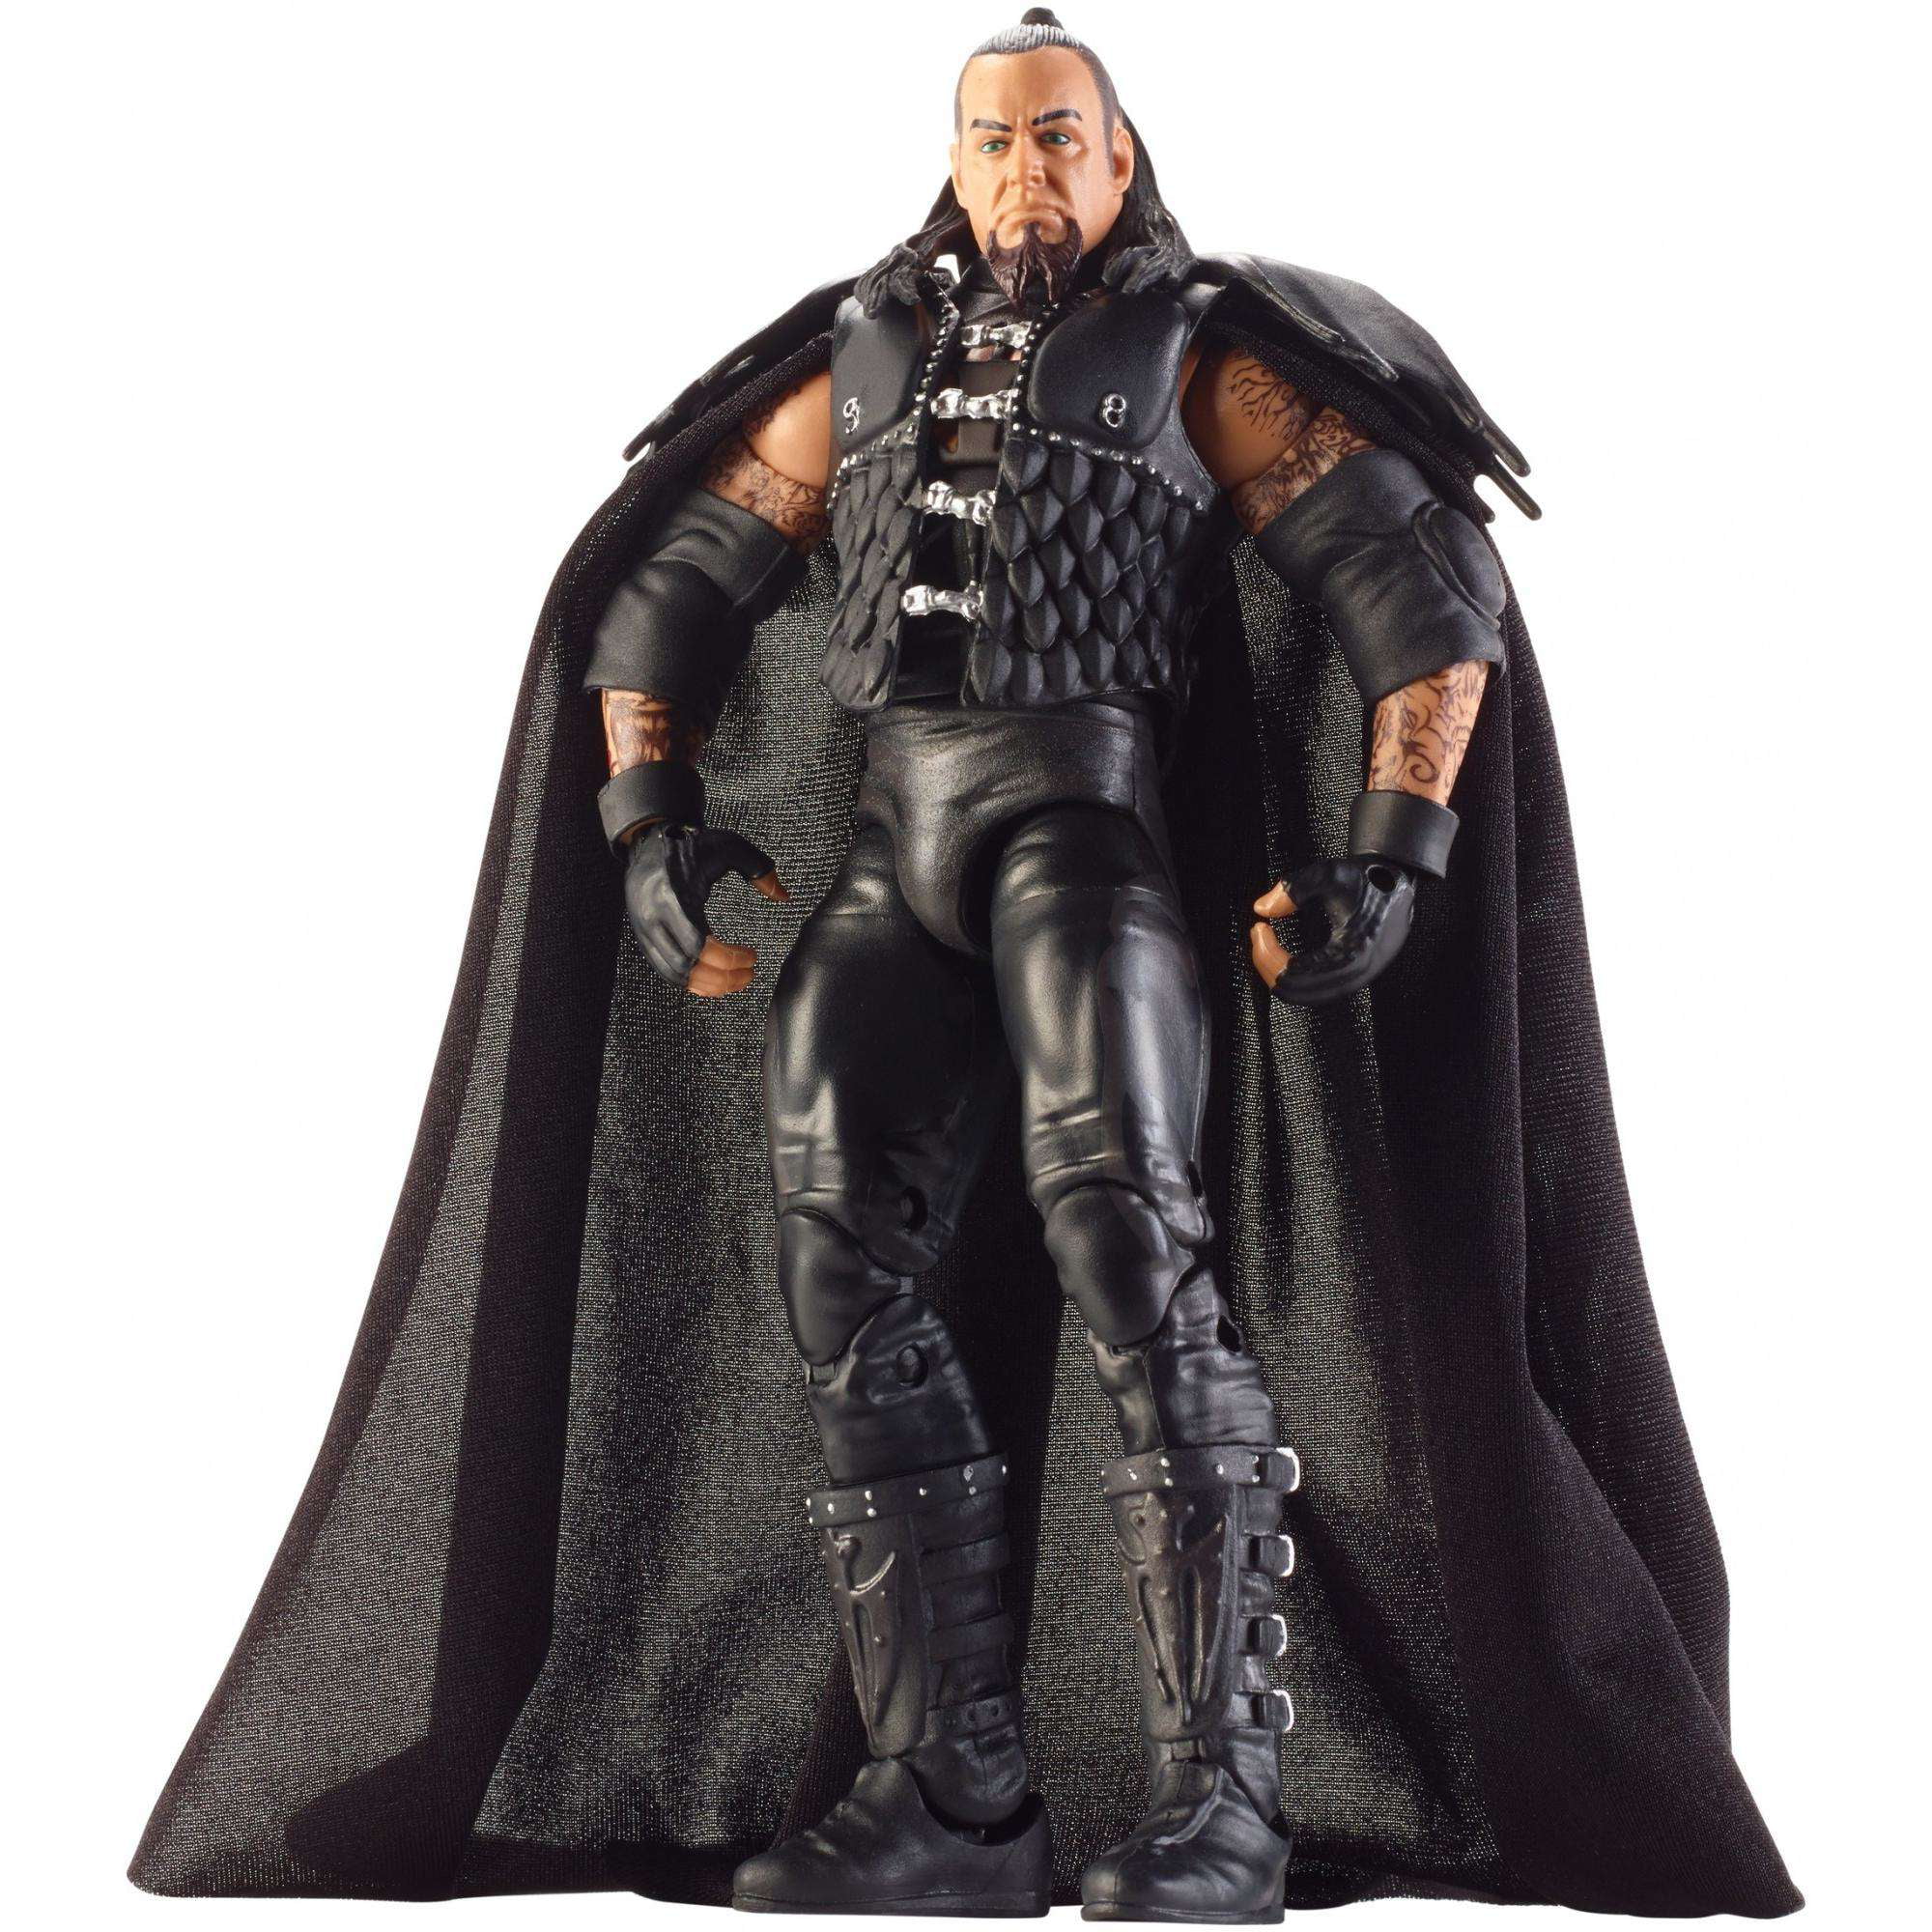 defining moments undertaker action figure